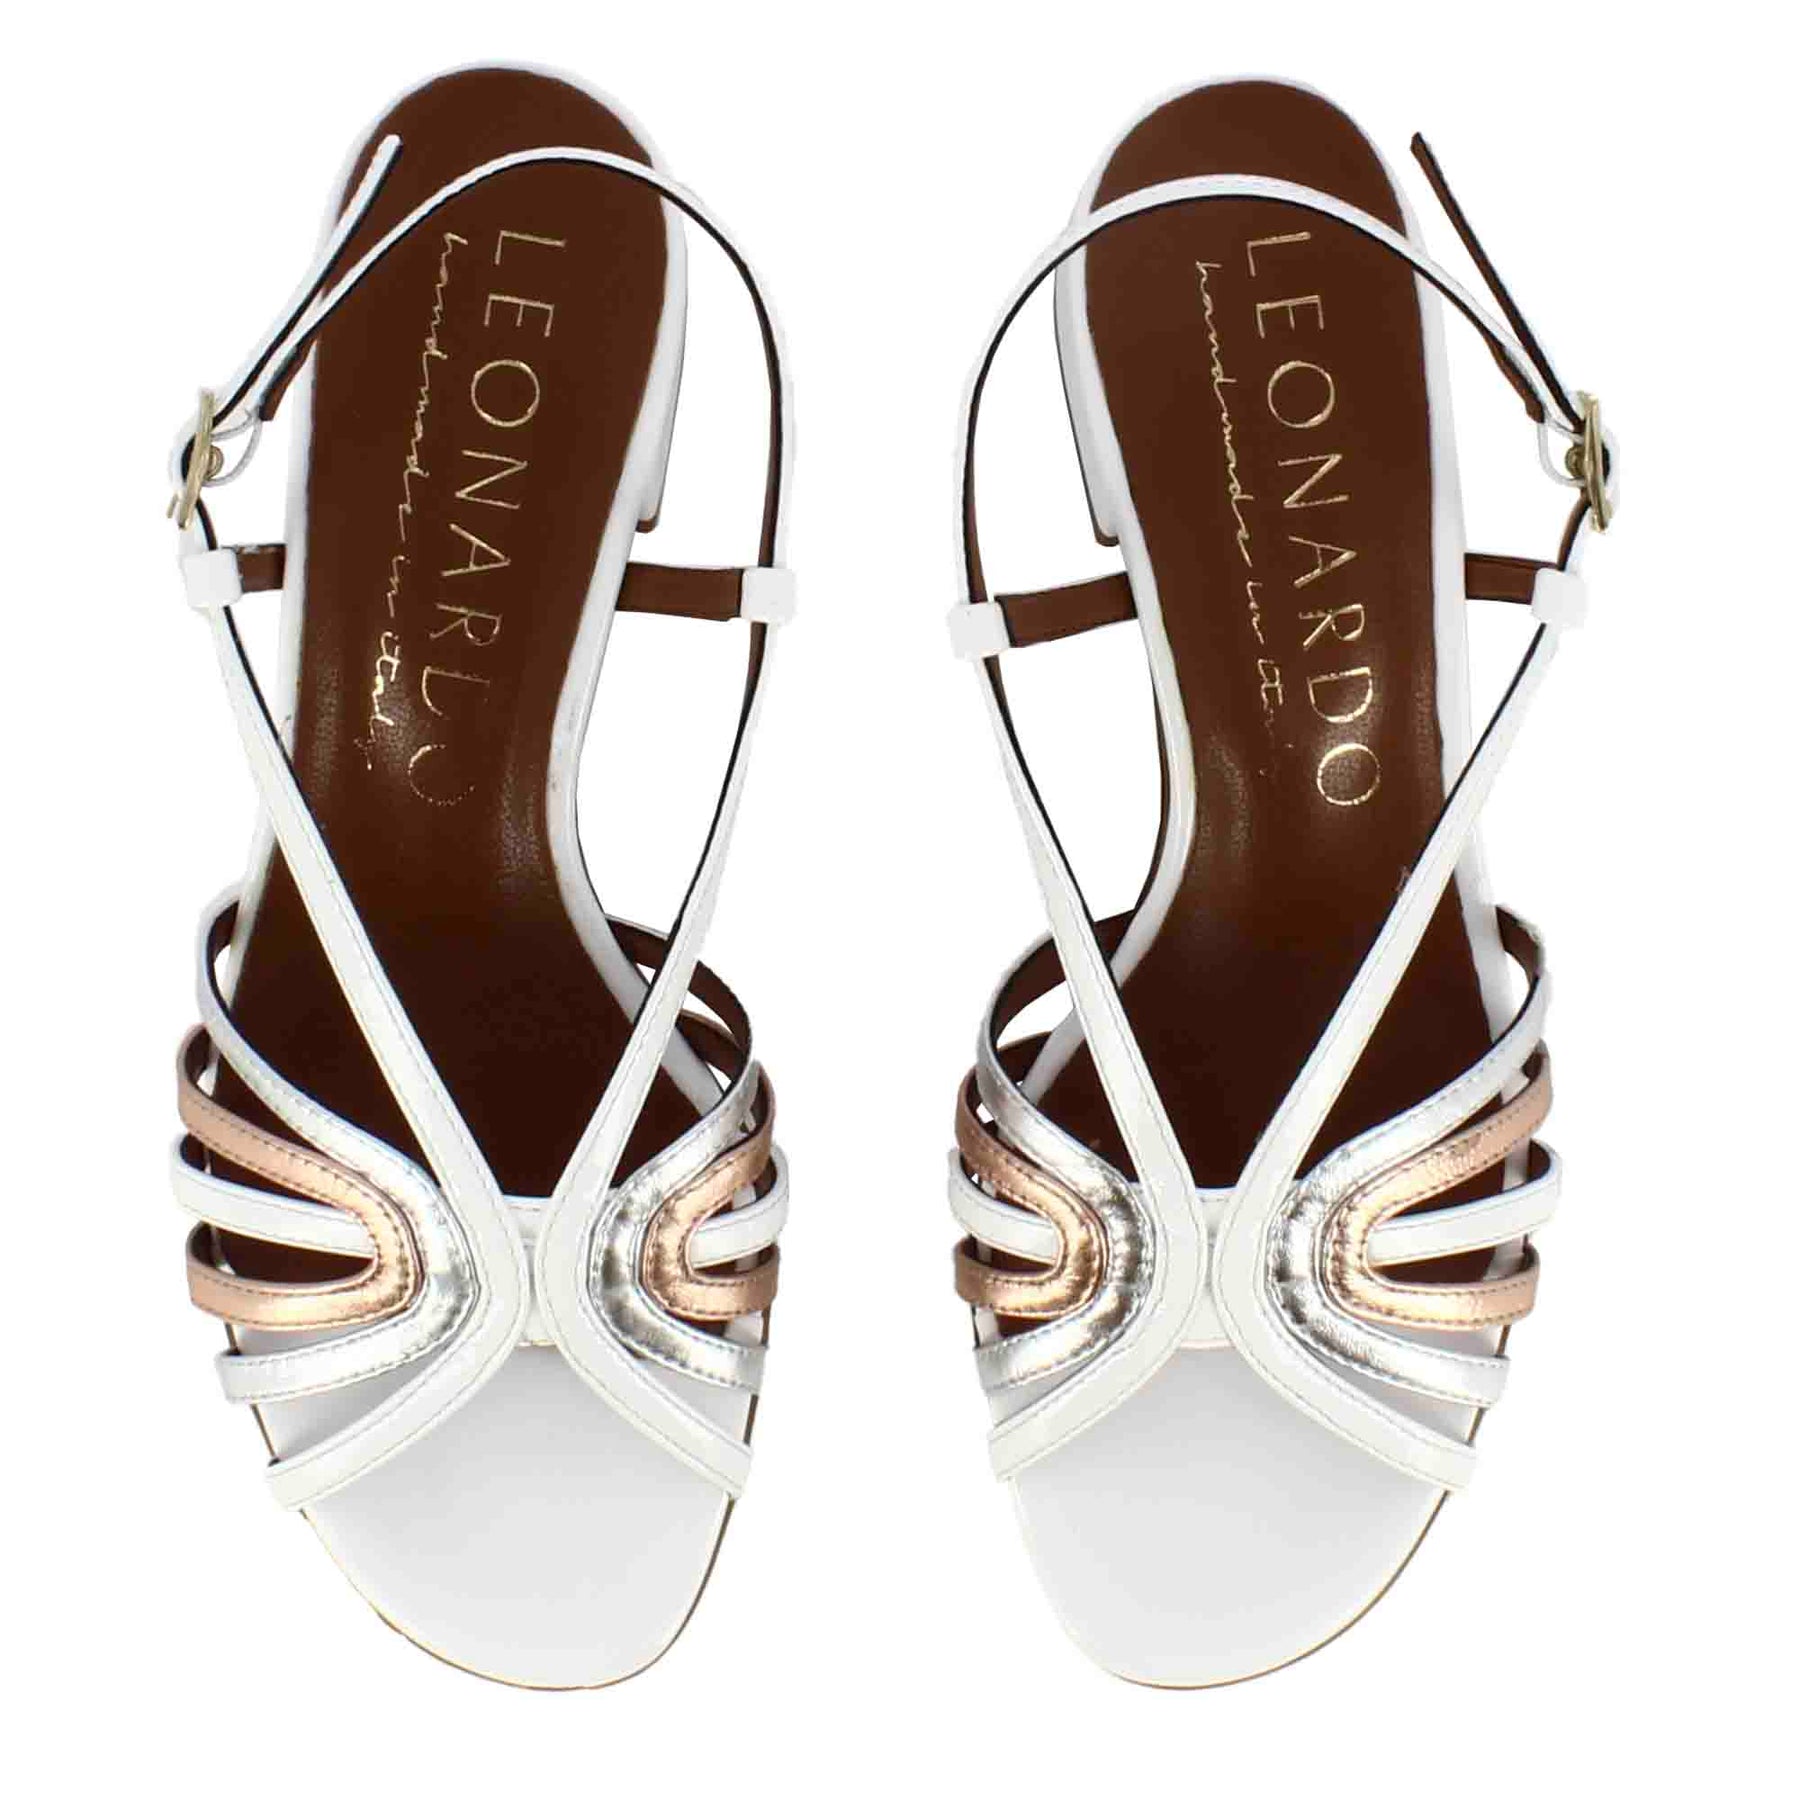 Women's sandal with copper and gold colored laminated leather bands